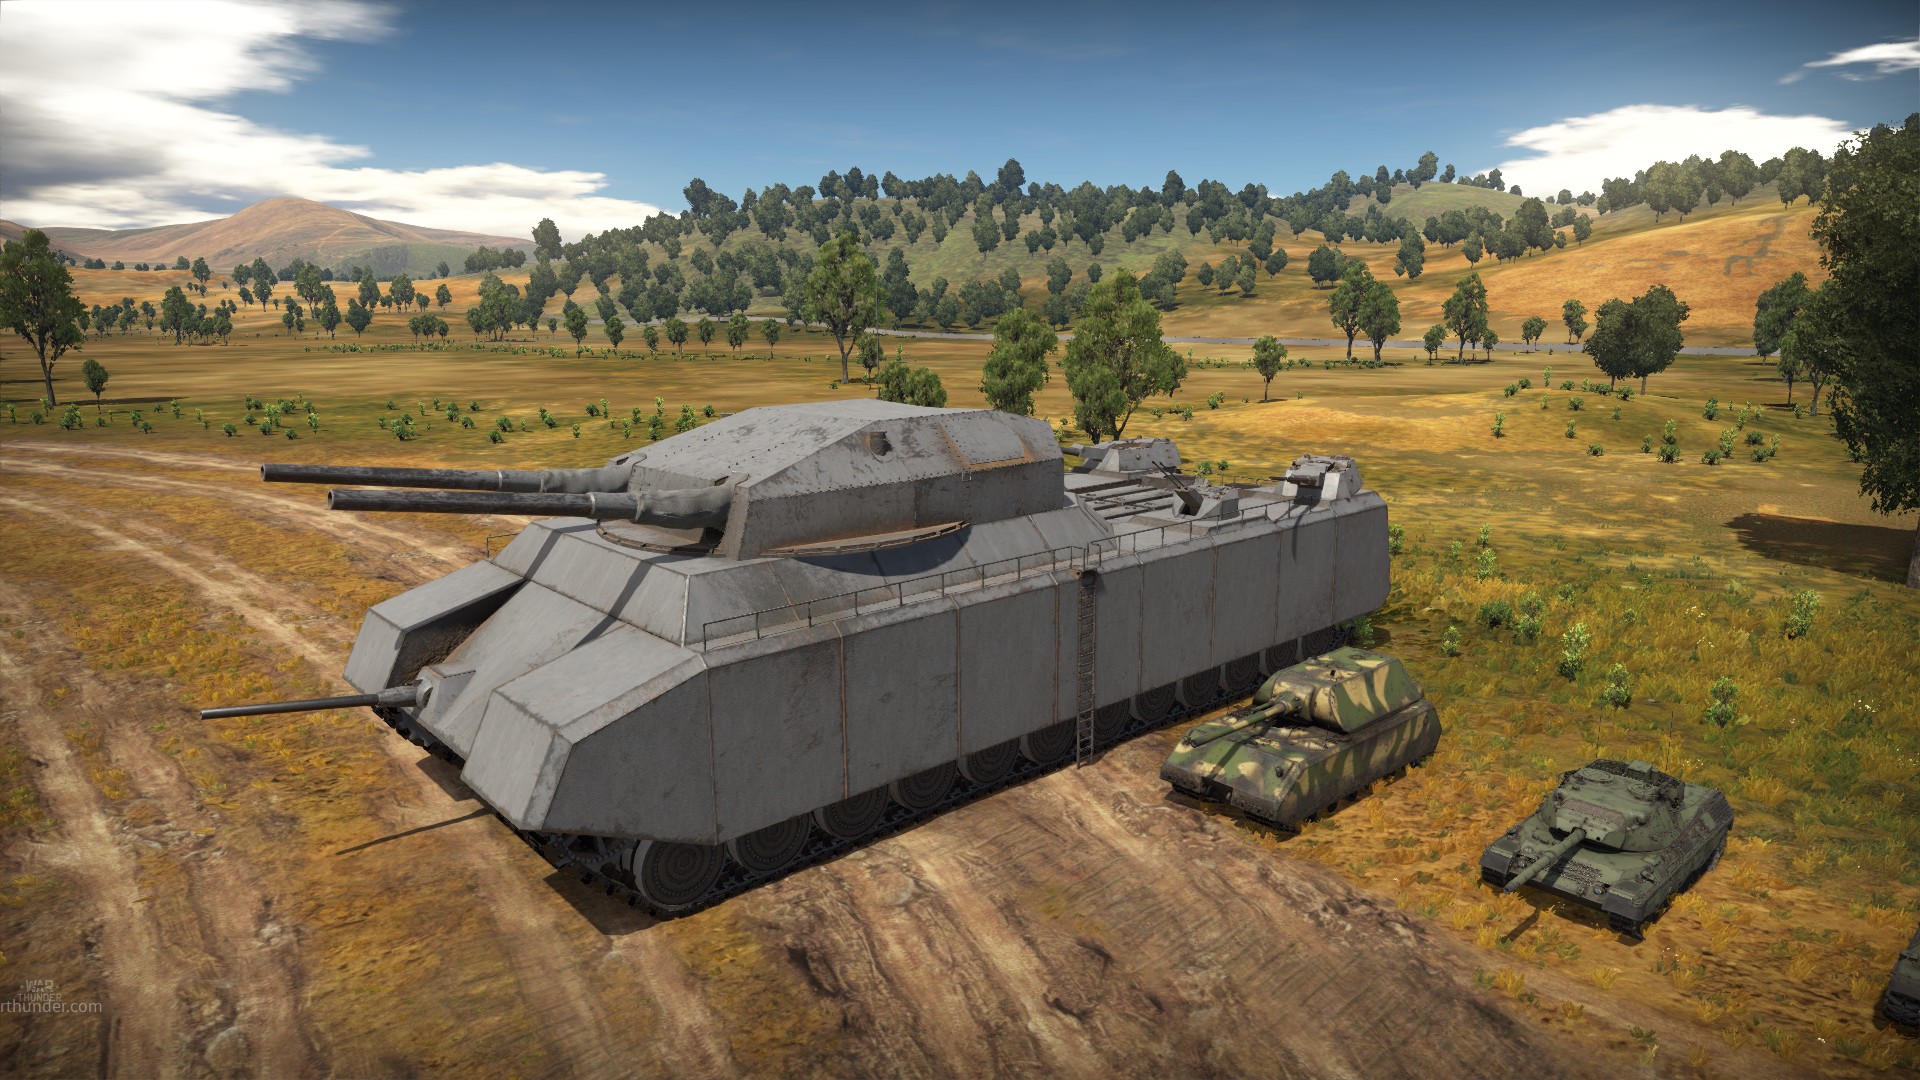 I know that this tank has a real design but but the insanity behind it make...